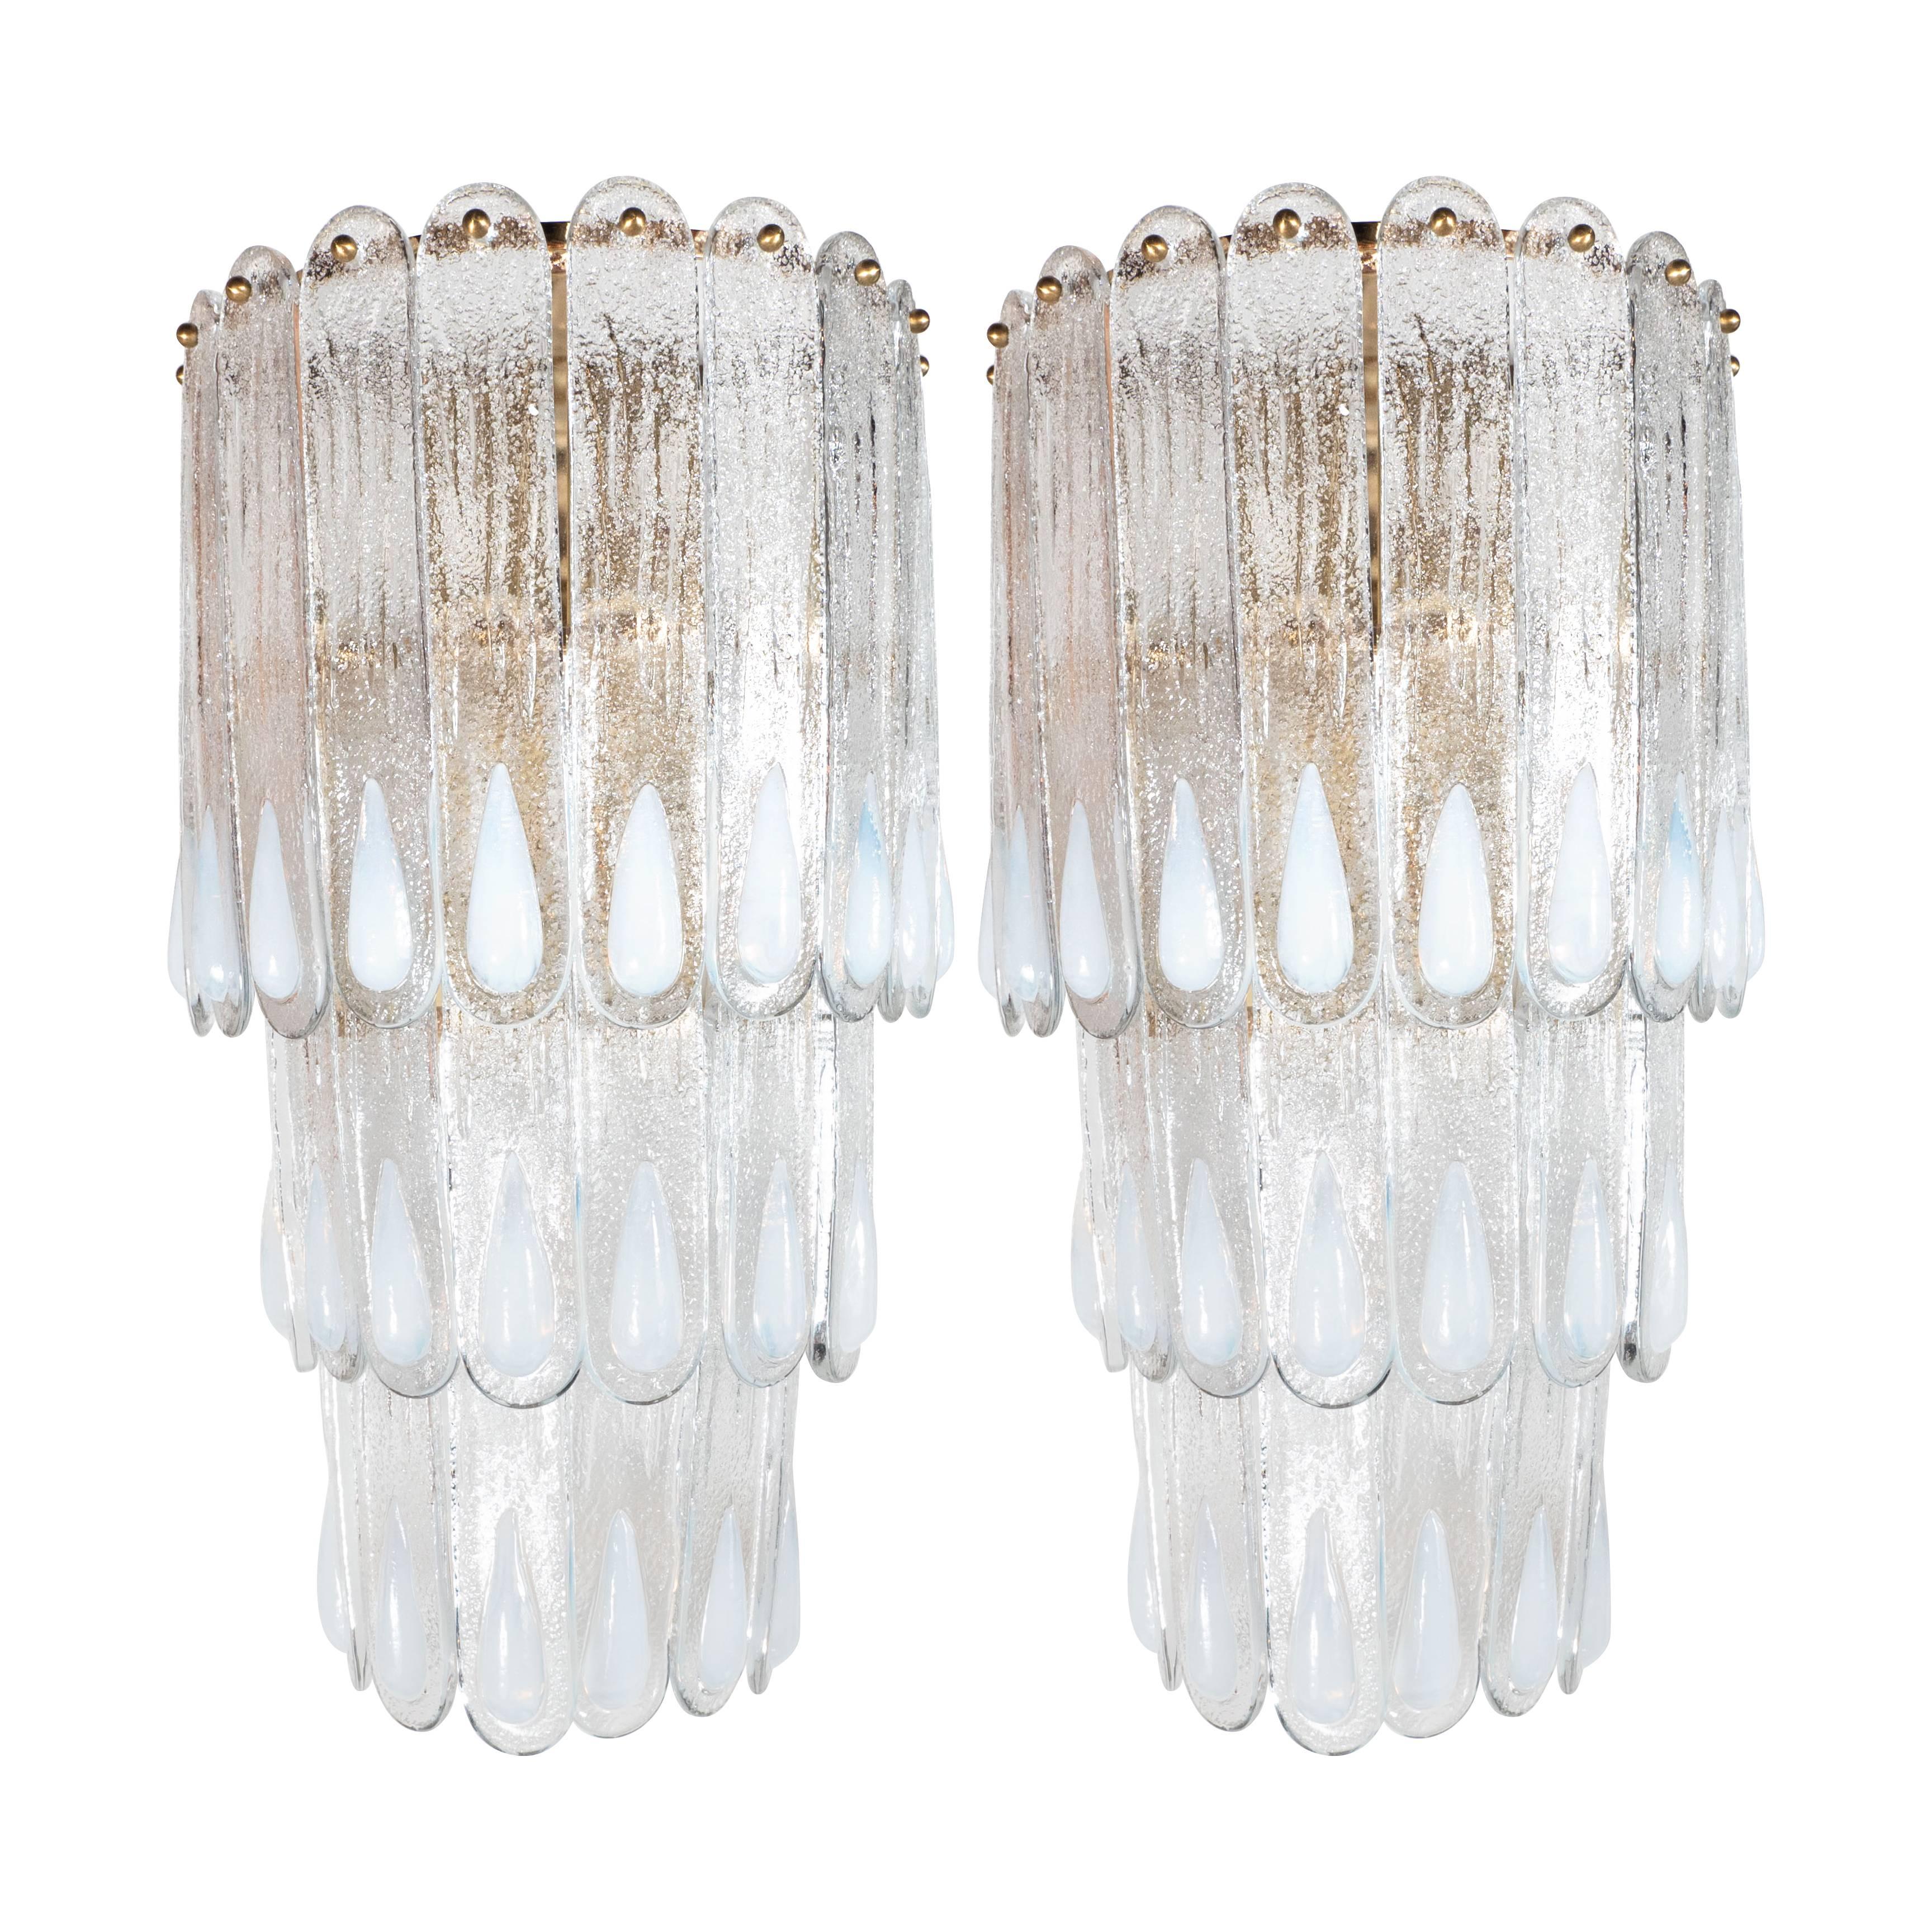 Midcentury Textured Clear and Iridescent Glass "Peacock" Sconce Pair by Mazzega﻿